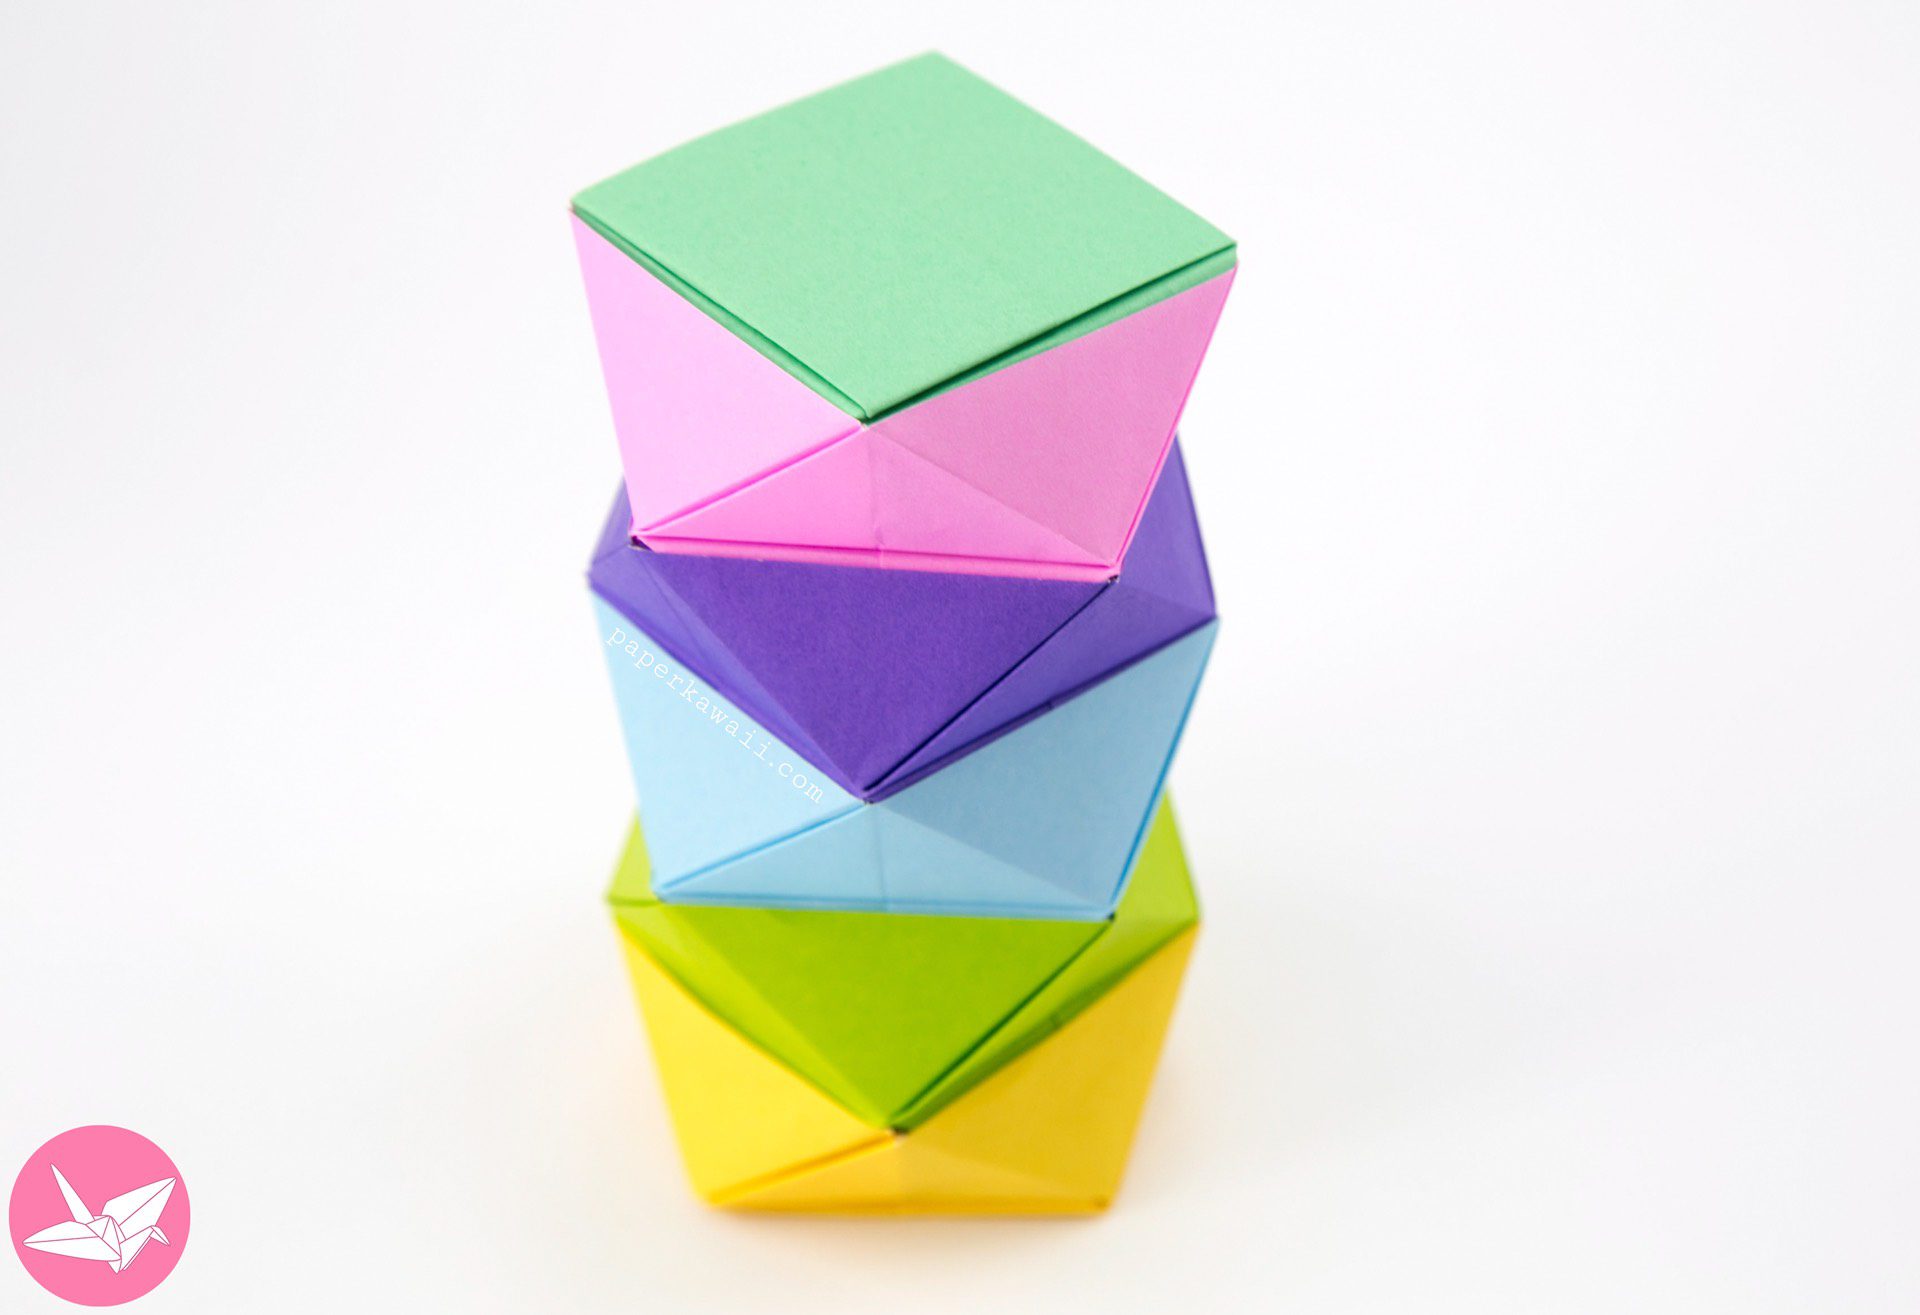 Fabulous Modular Origami: 20 Origami Models with Instructions and Diagrams [Book]